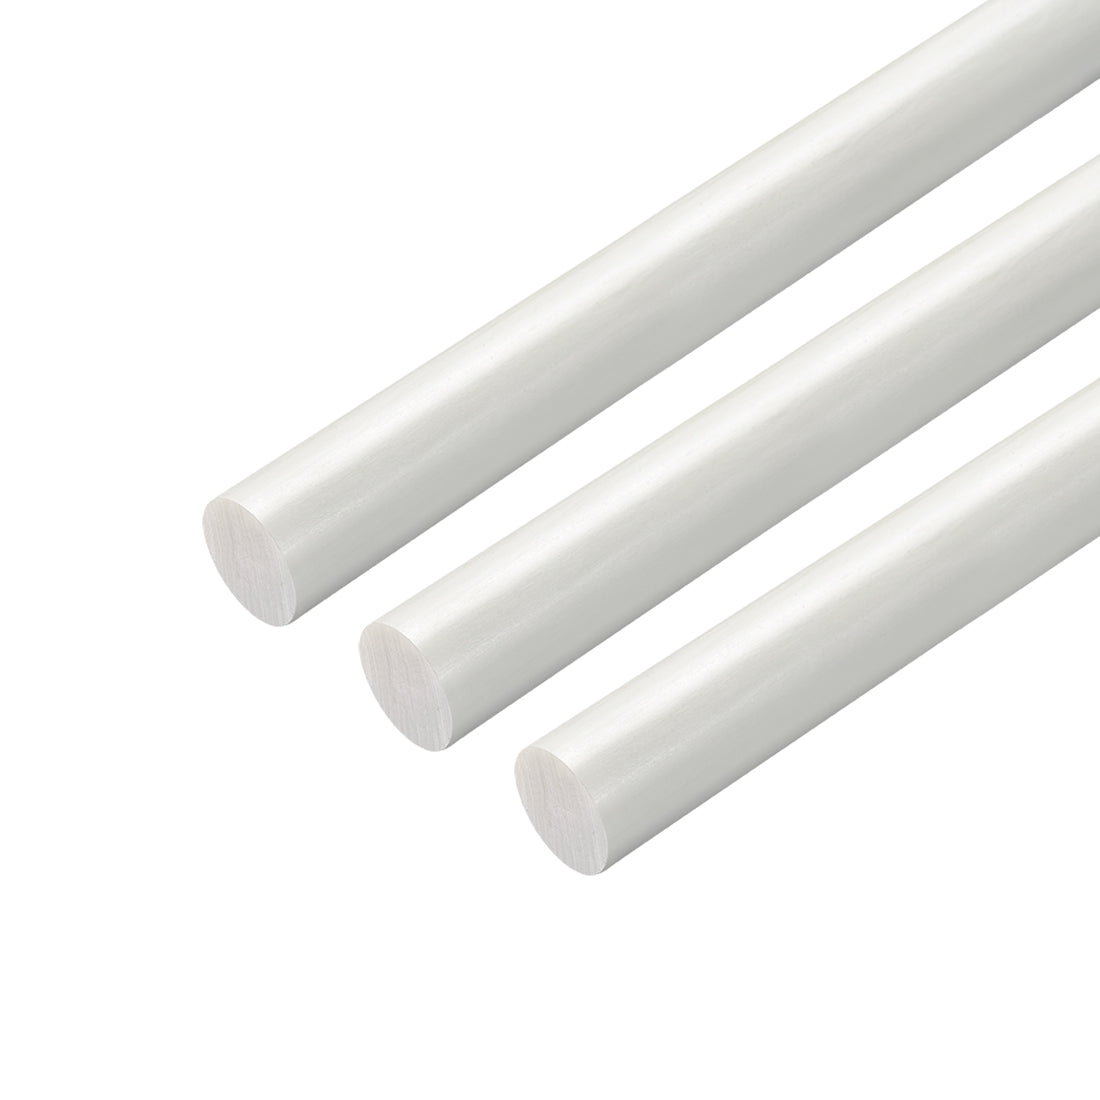 uxcell Uxcell FRP Fiberglass Round Rod,9mm Dia 50cm Long,White Engineering Round Bars 3pcs